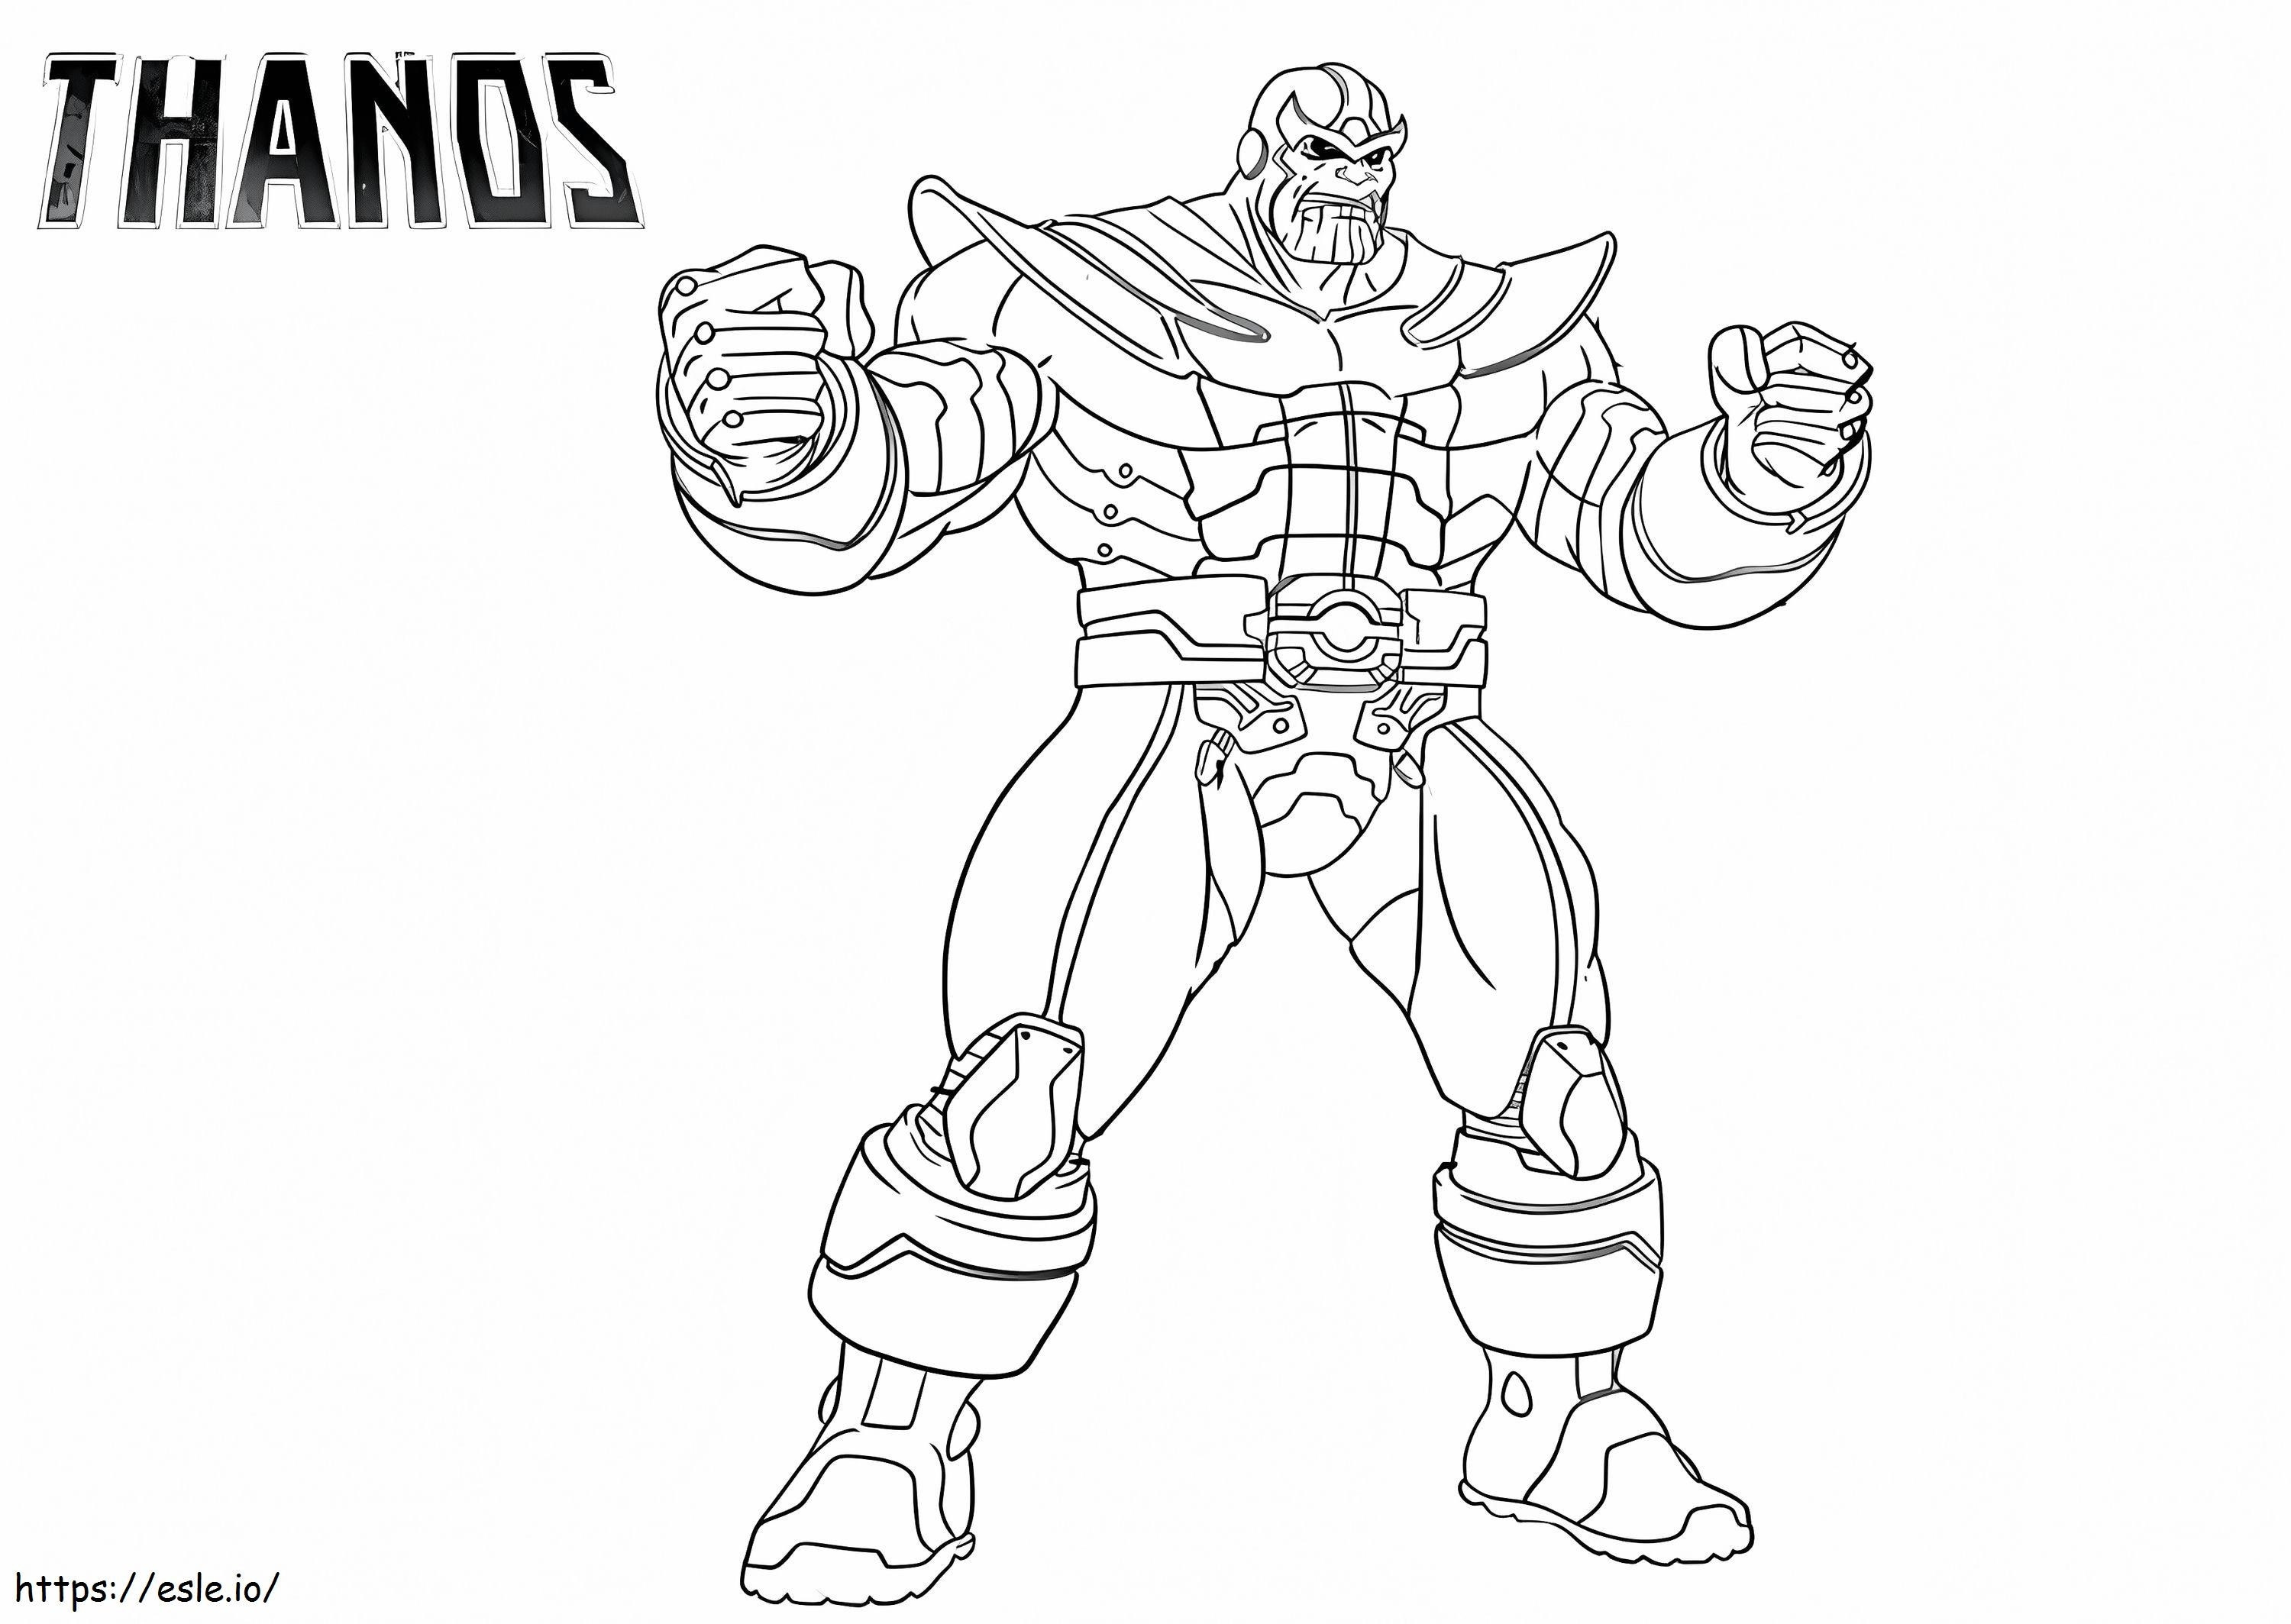 Strong Thanos coloring page